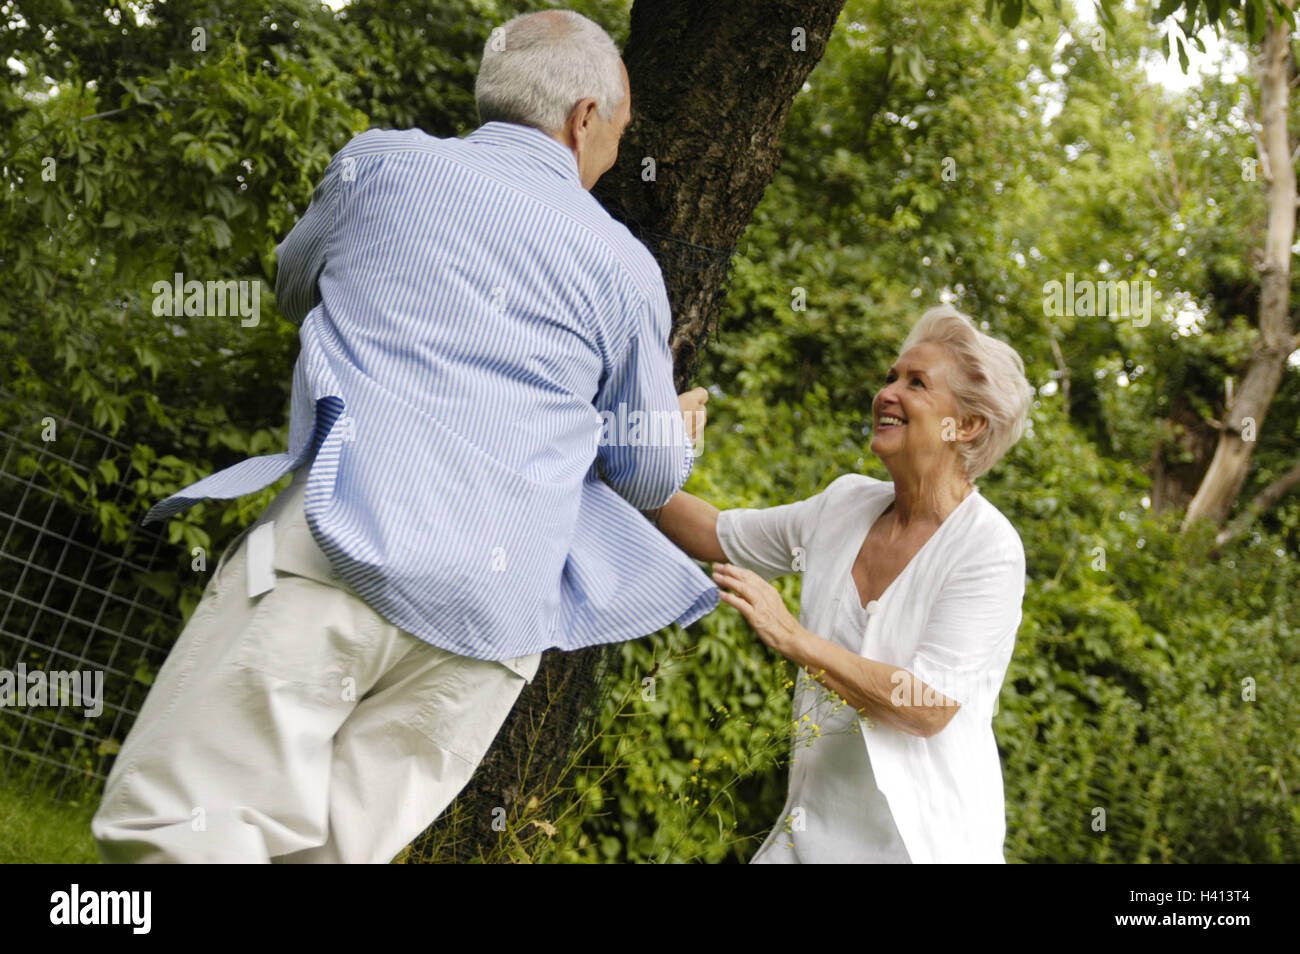 Garden, tree, senior pair, catches  plays  Summers, leisure time, fun, enjoyments, zest for life, happily, falls in love, love, enterprising, pair, young-remained seniors, well Agers, laughs, cheerfully, together, freely, light-heartedness Stock Photo